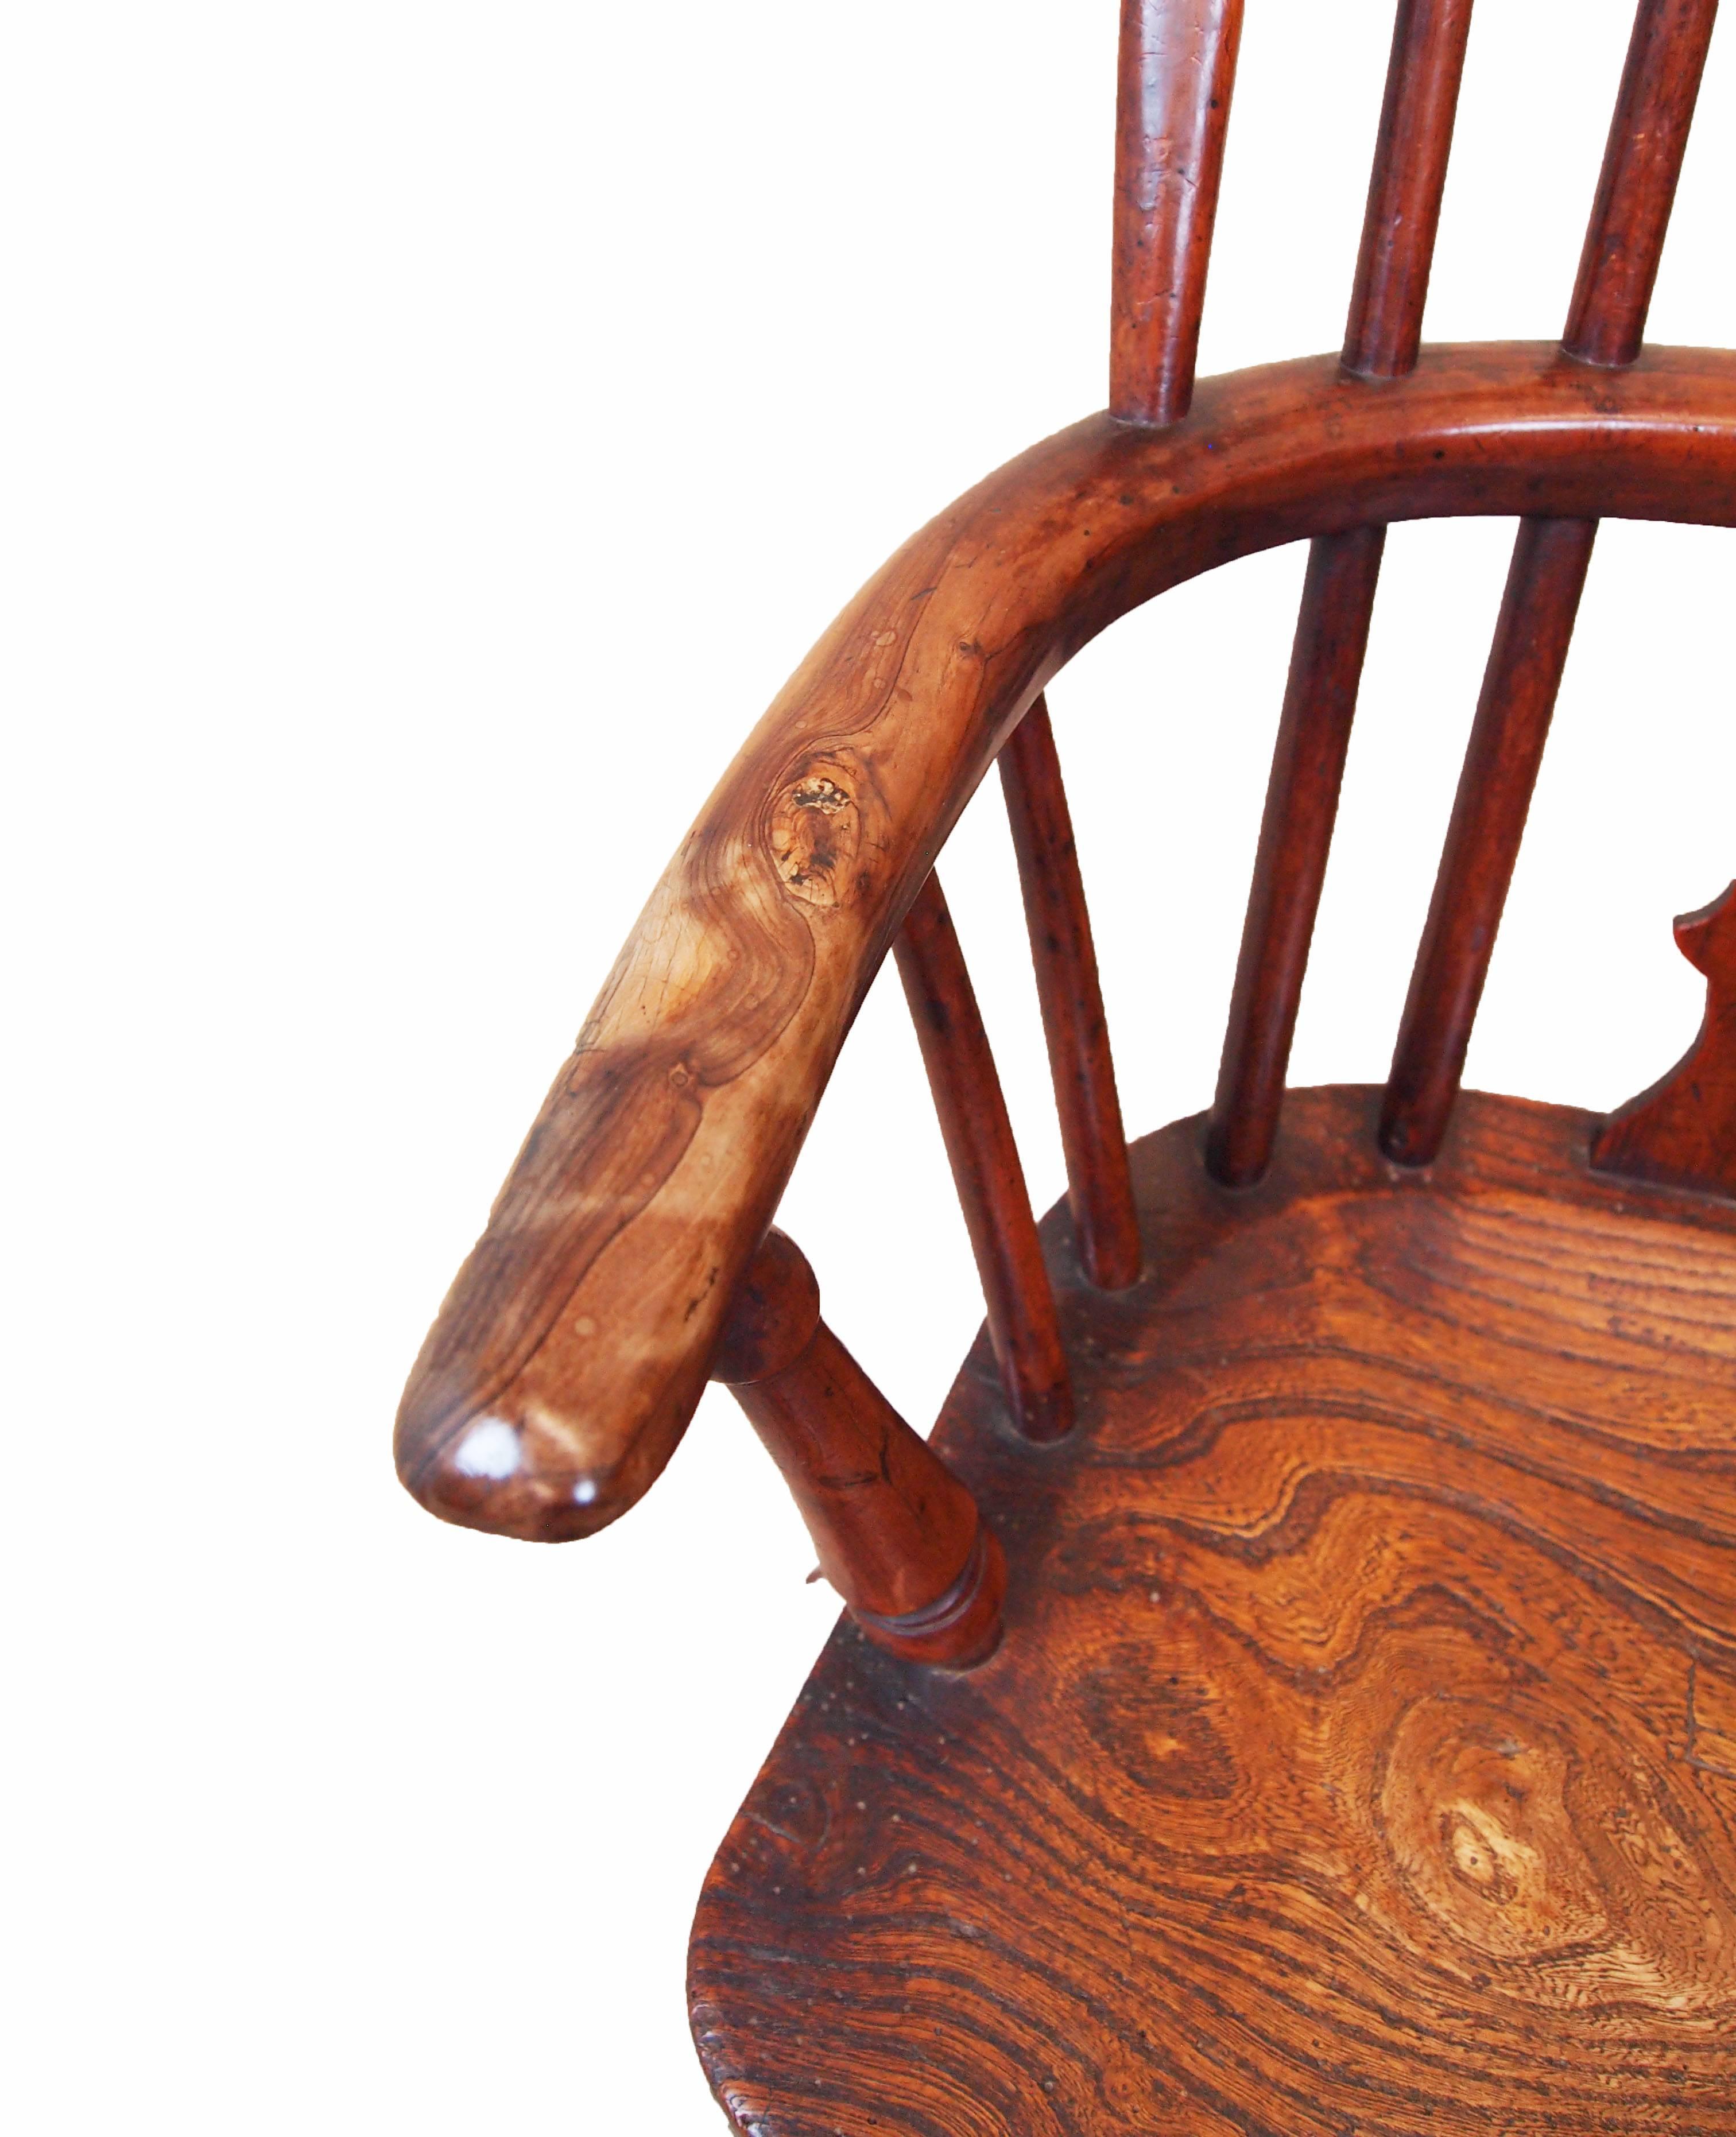 A delightful 19th century yew, ash and elm child's size windsor armchair having
attractive pierced splat back raised on turned legs united by crinoline
stretcher.